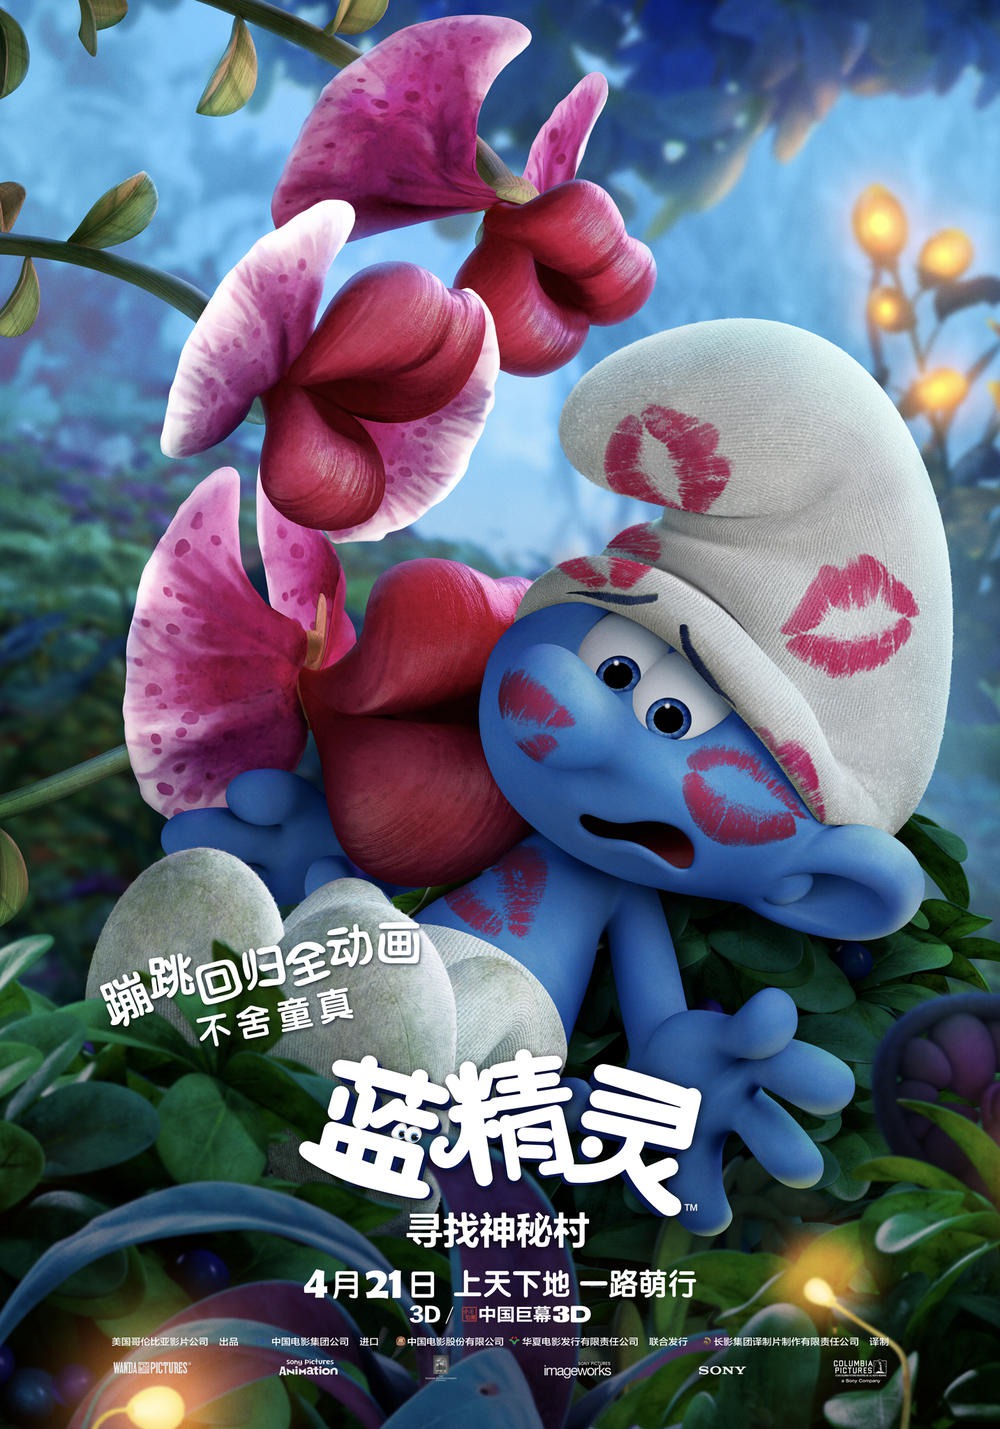 Extra Large Movie Poster Image for Smurfs: The Lost Village (#11 of 13)